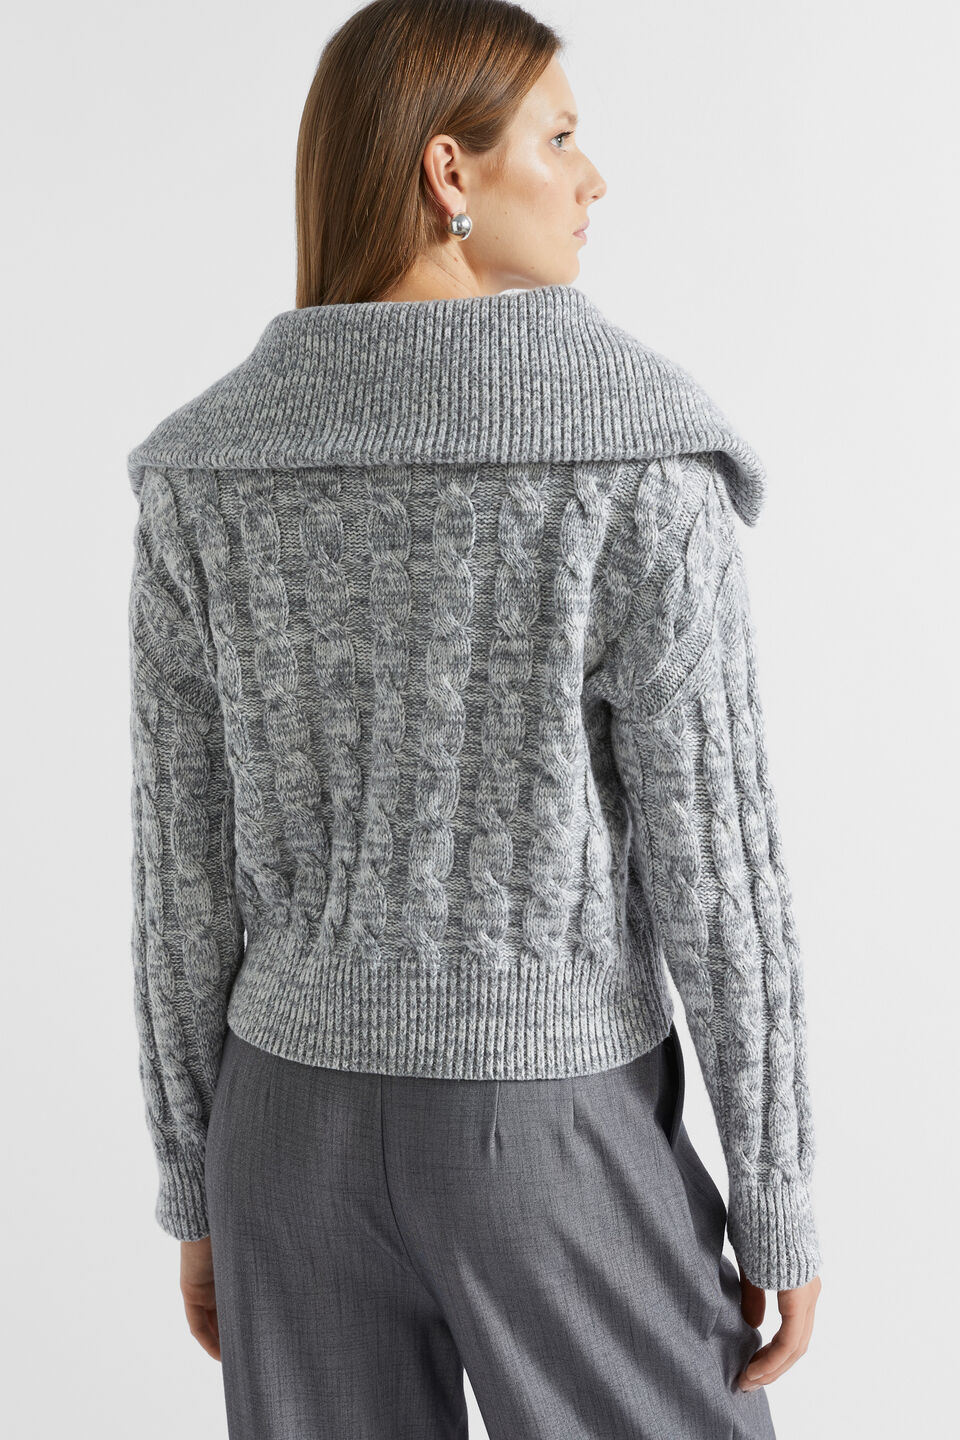 Cotton Blend Twist Cable Knit  Wolf Marle